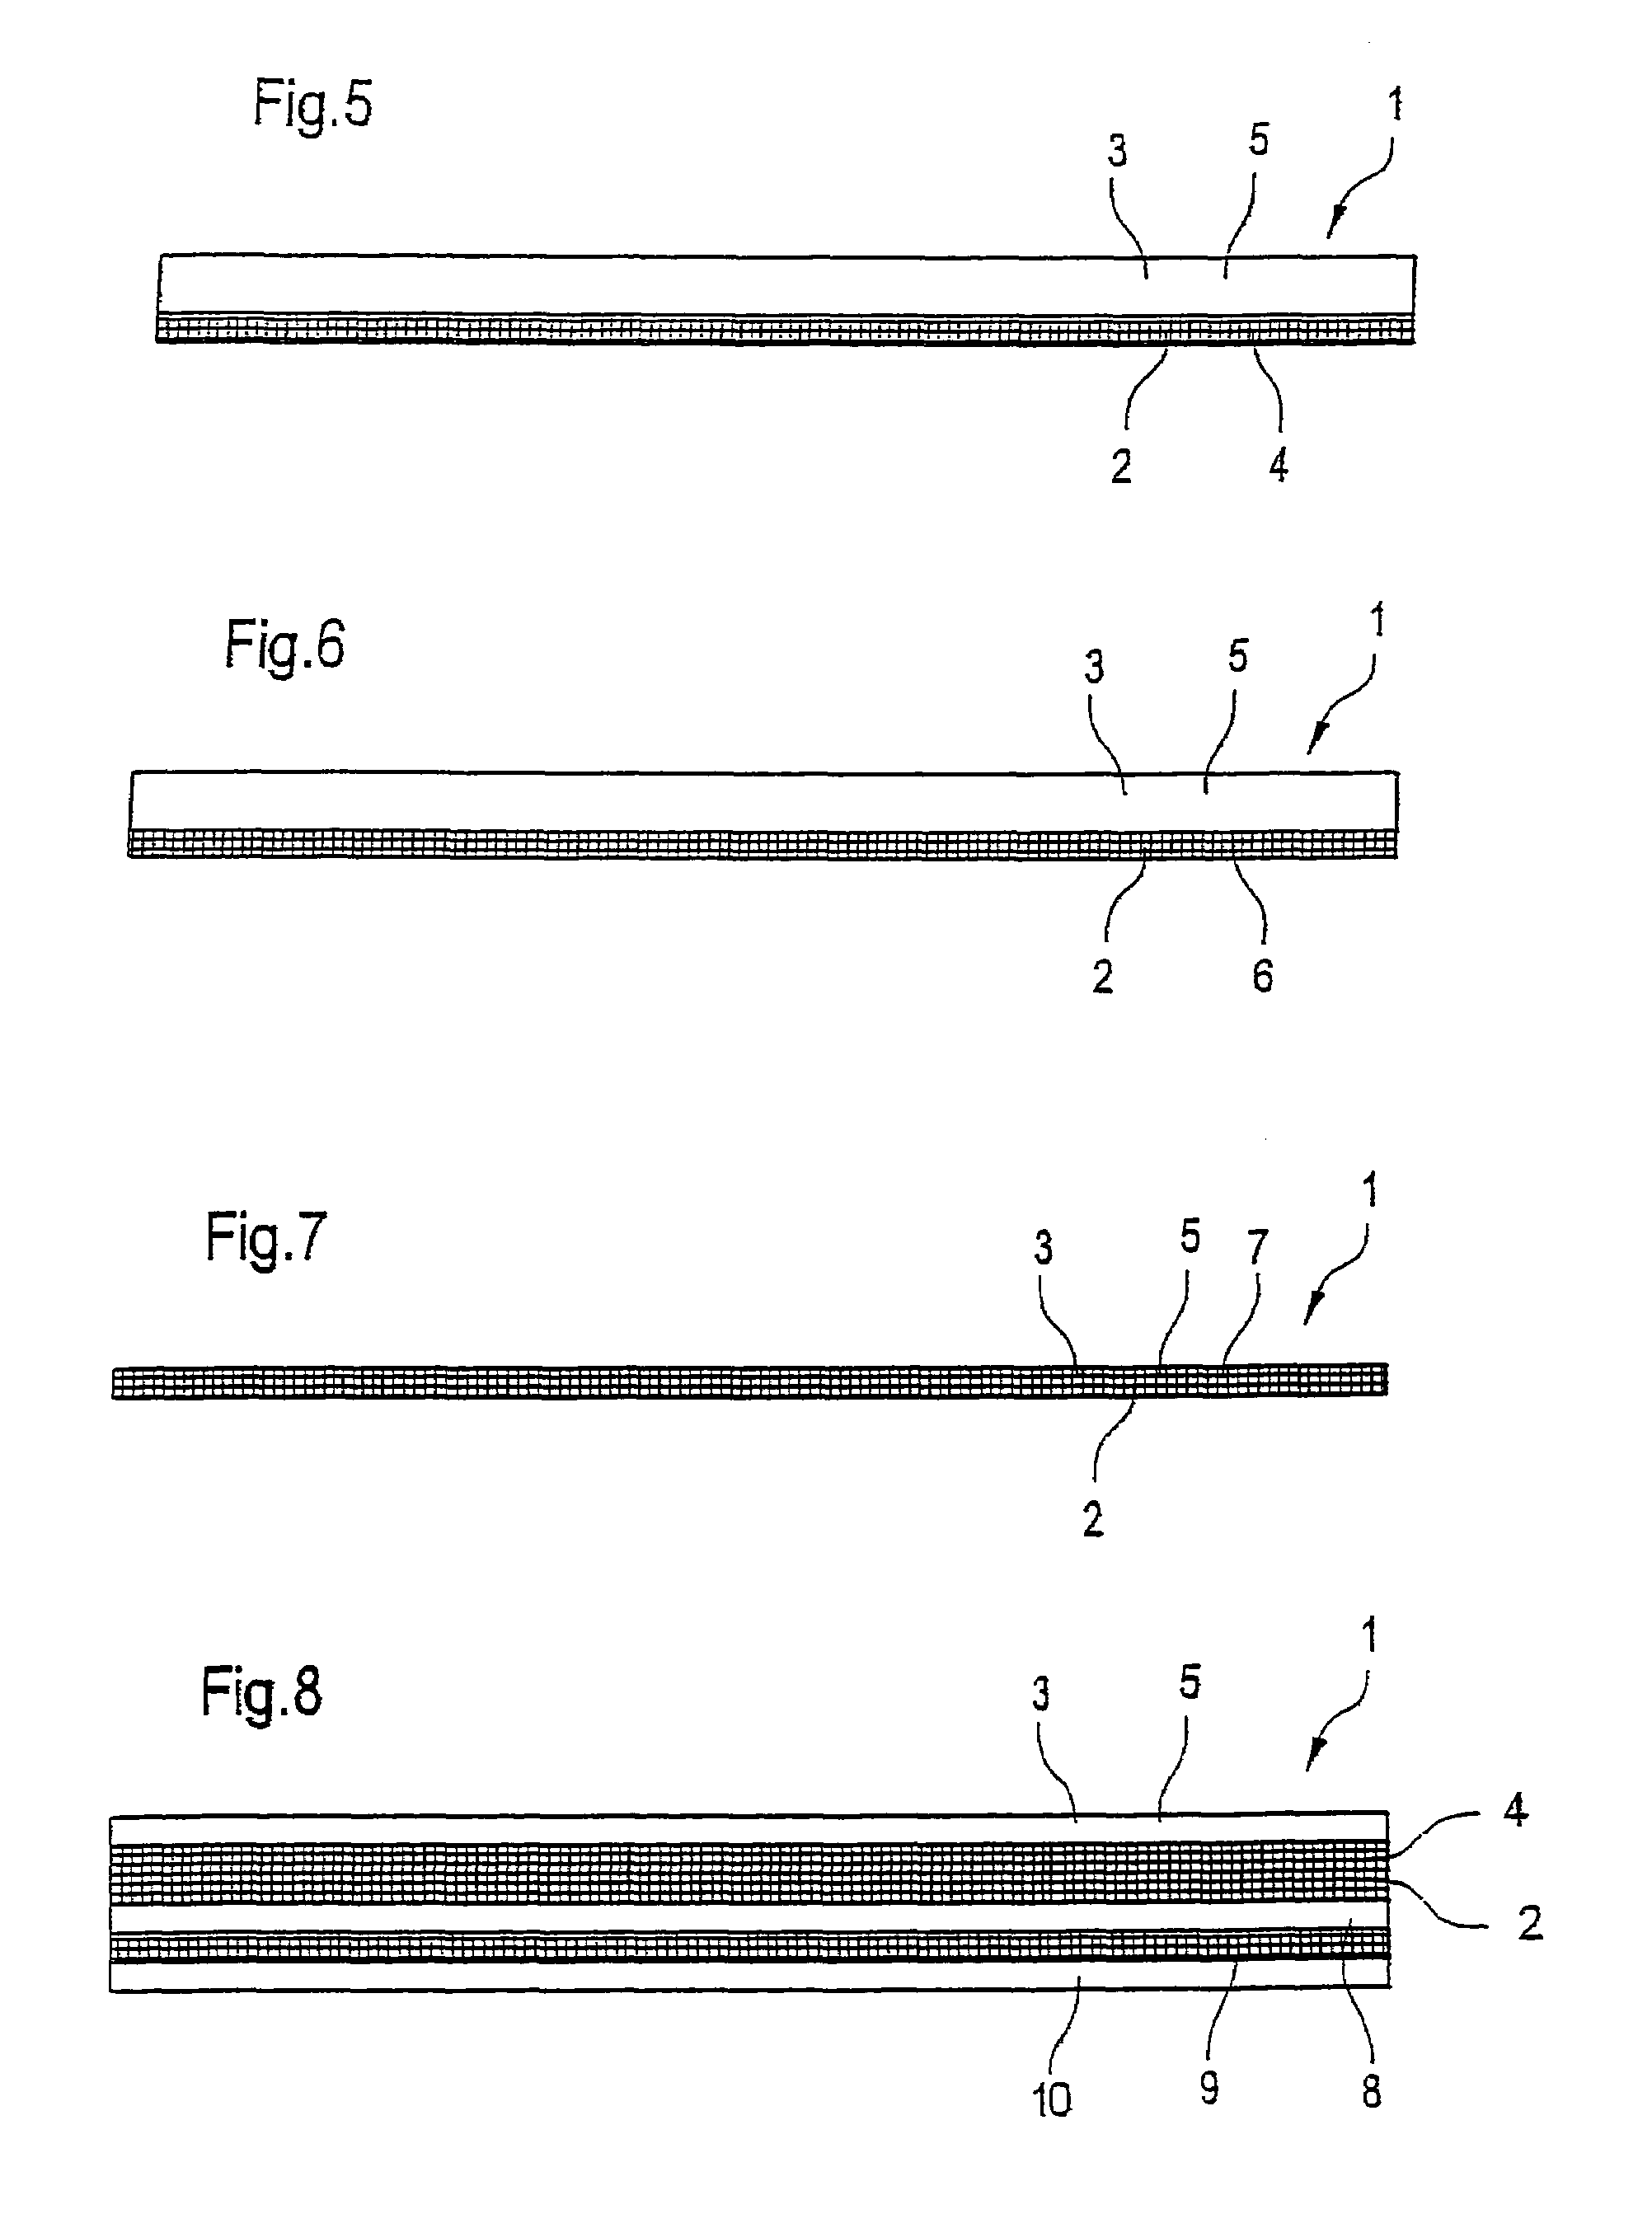 Belt for transferring an in-production fibrous web